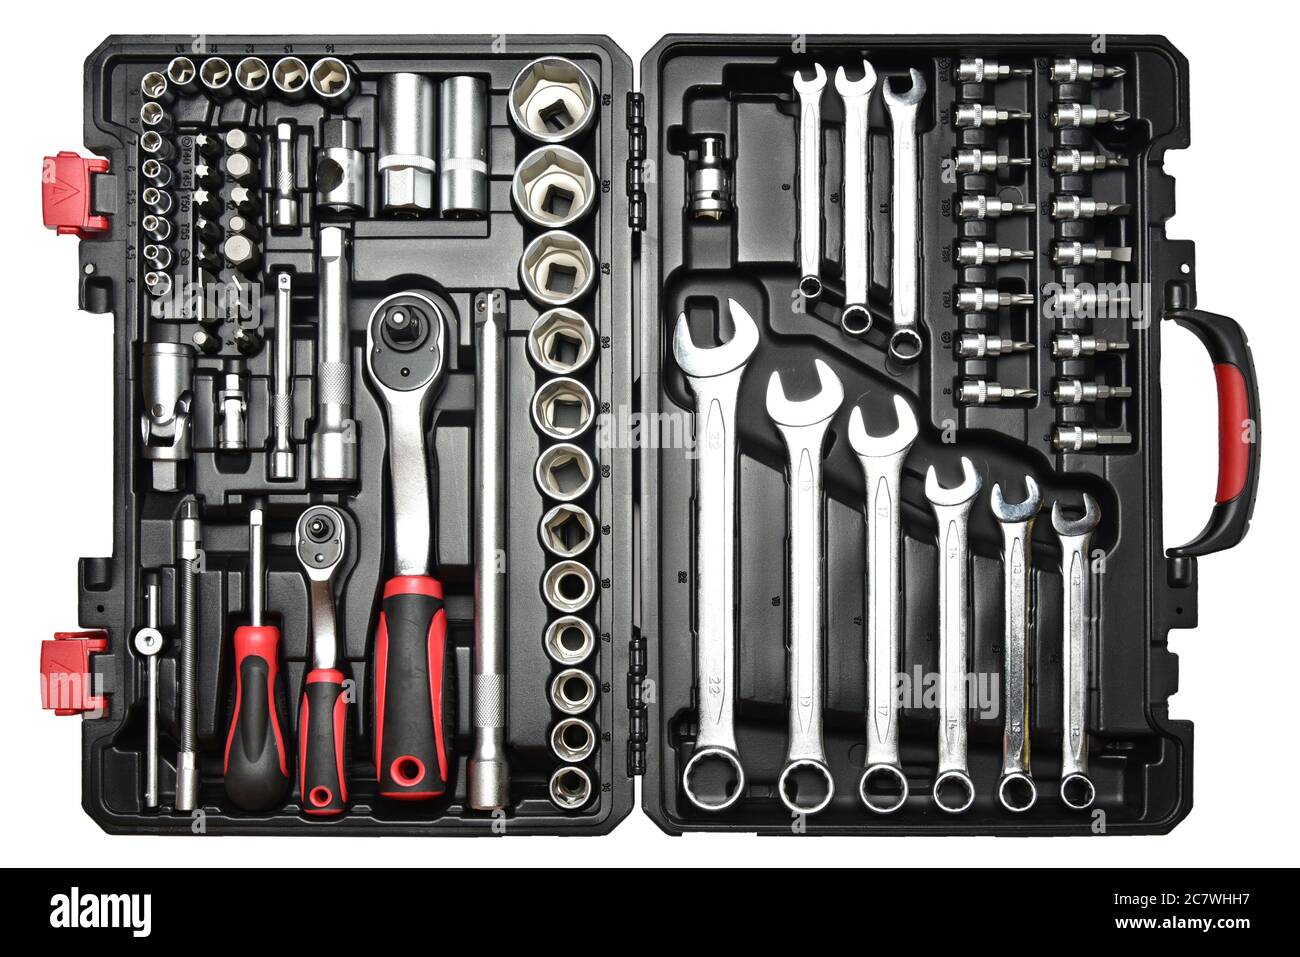 Toolbox set of wrenches, car mechanic tools in repair kit case with ratchet  handle and sockets Stock Photo - Alamy